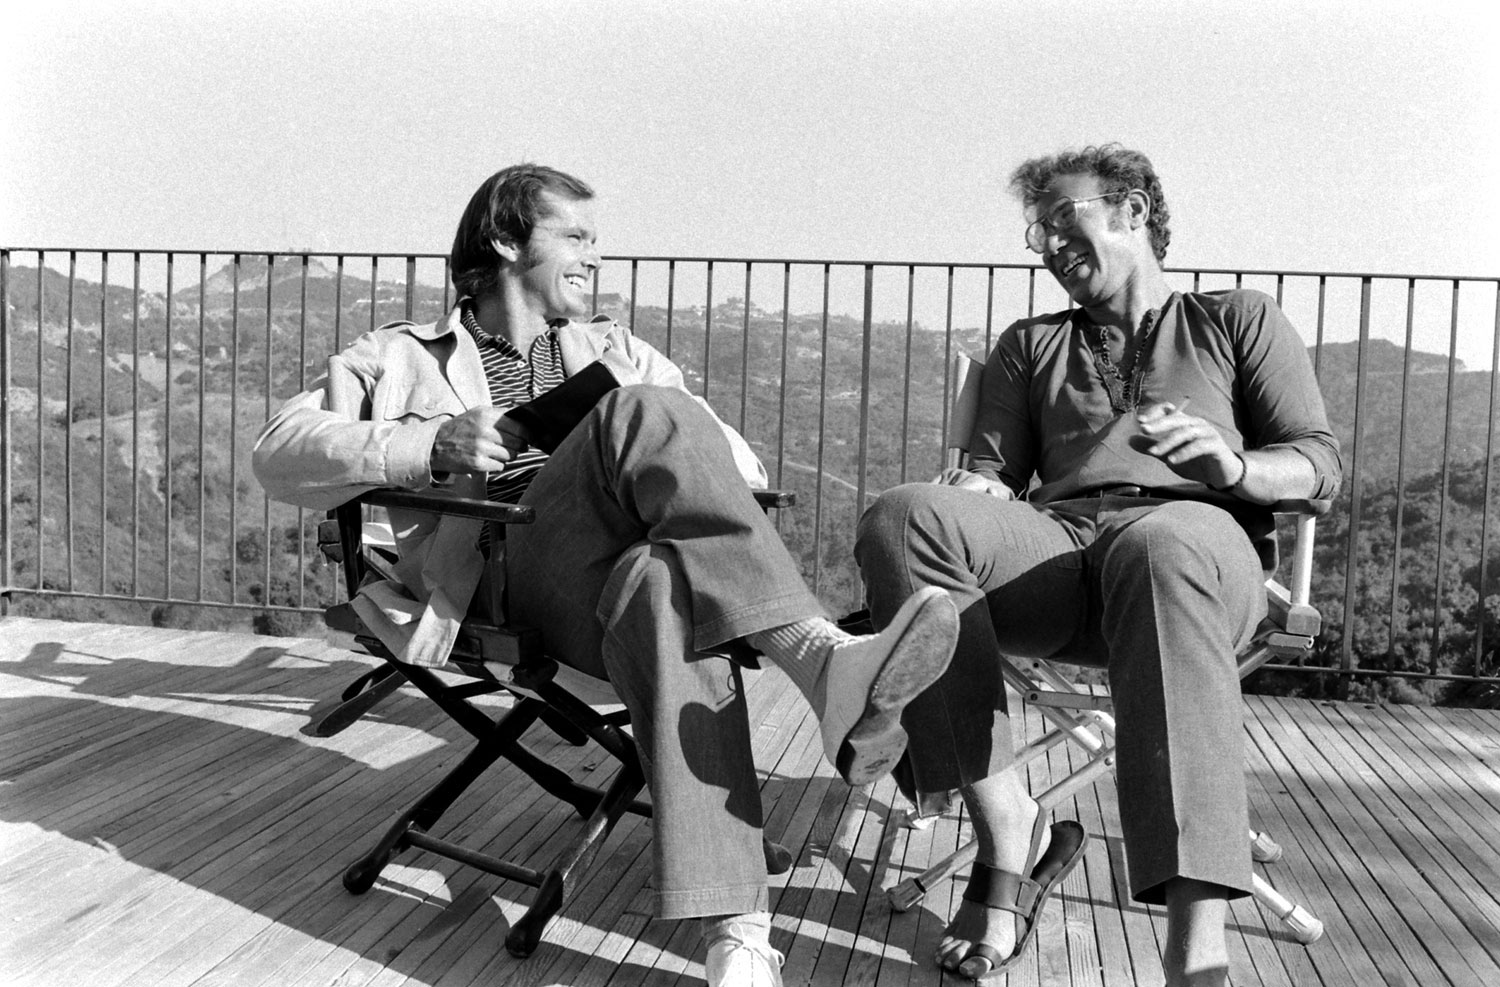 Jack Nicholson and director Bob Rafelson chat on the deck of Nicholson's home, Los Angeles, 1969.